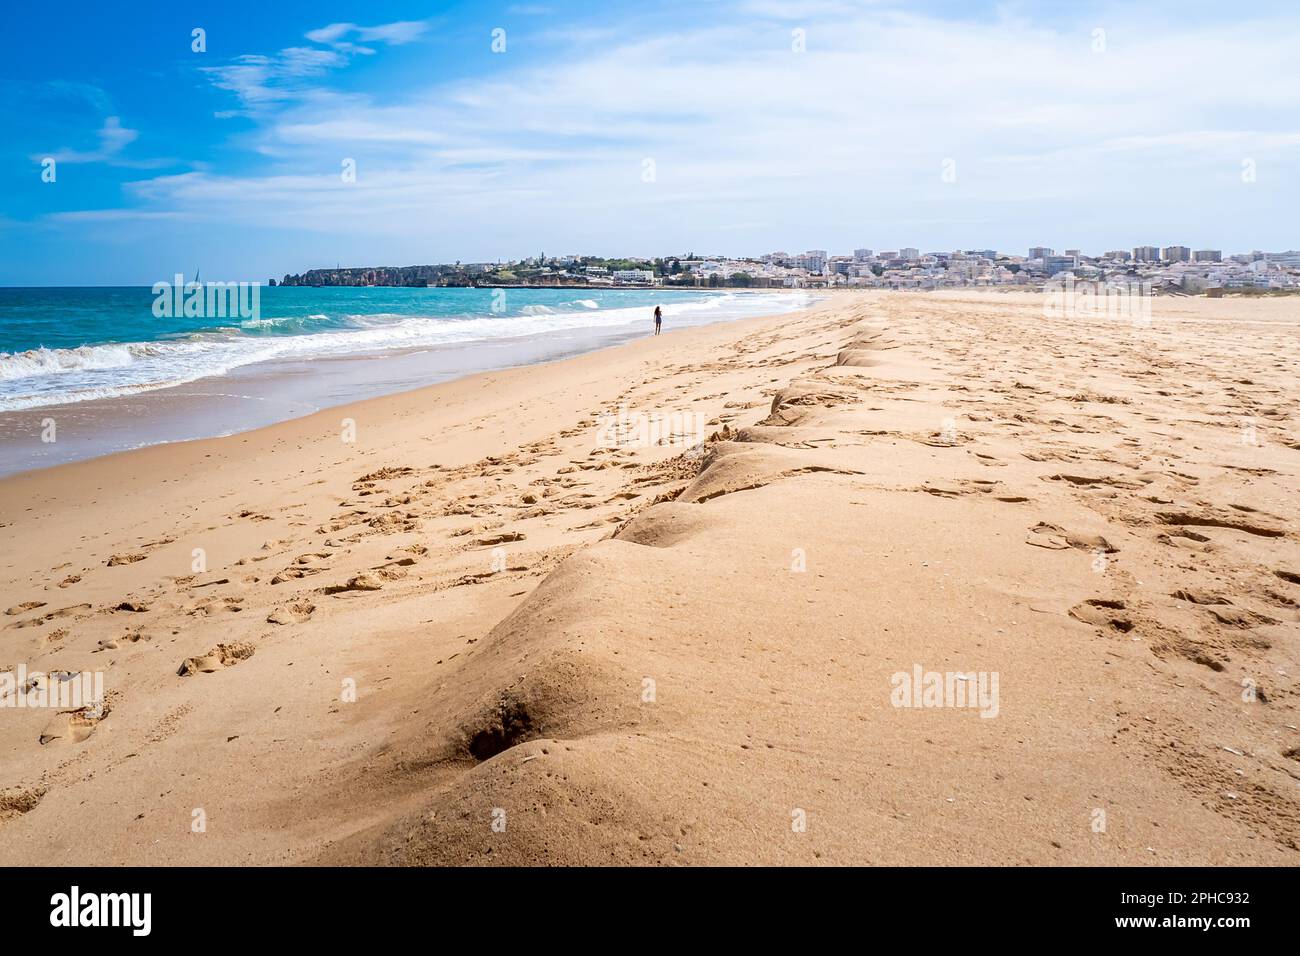 A stunning panoramic view of the deserted Meia Praia beach with the shallow waters reflecting the blue sky, and a lone woman walking towards Lagos. Stock Photo